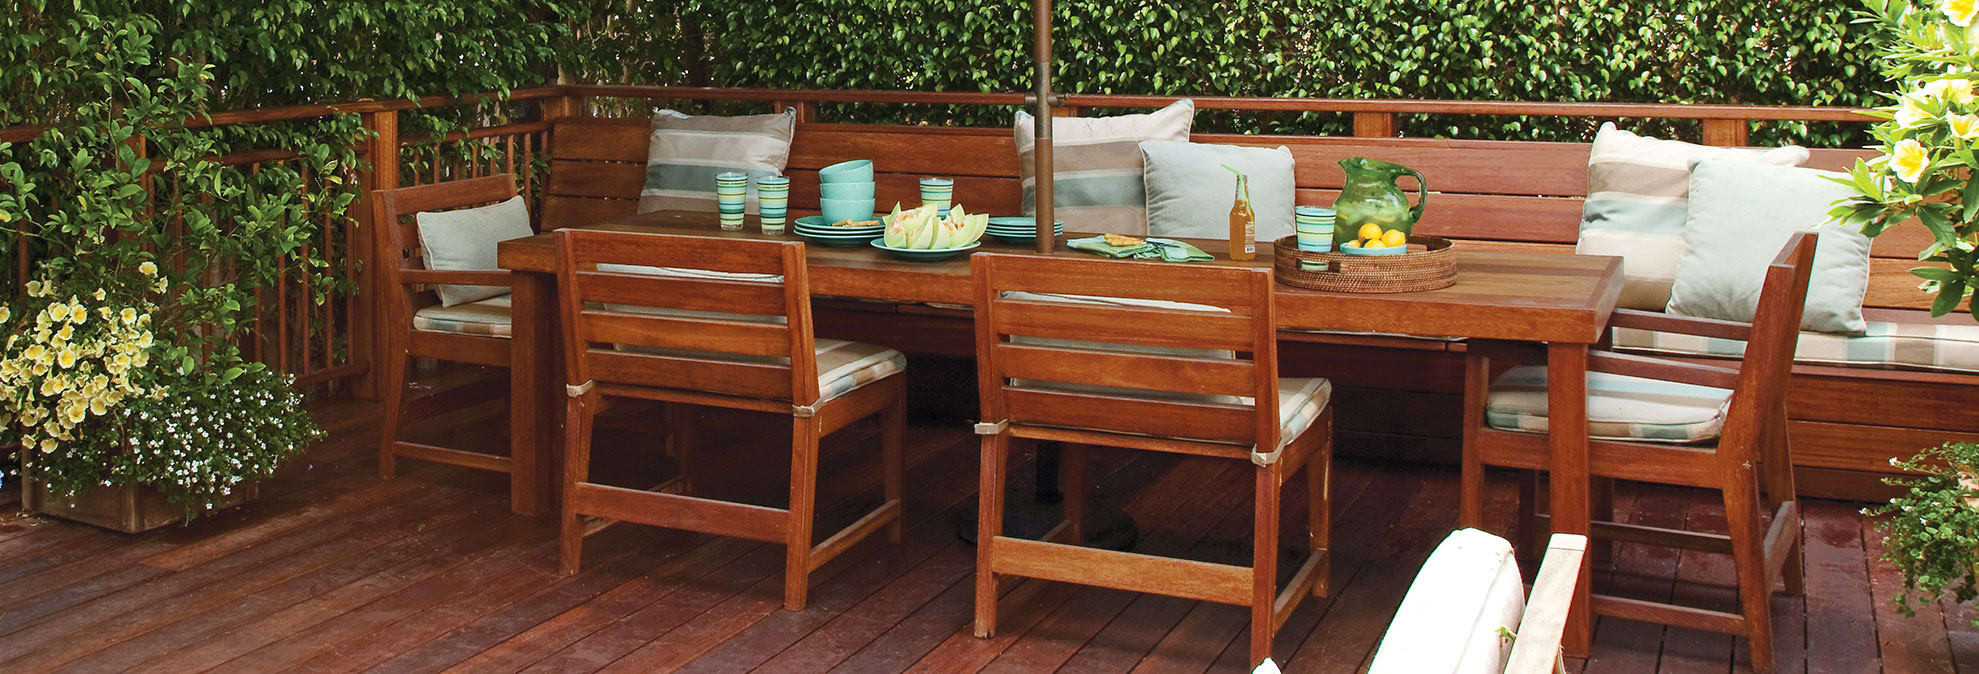 Best Deck Paint Consumer Reports
 5 Expert Tips for Staining a Deck Consumer Reports